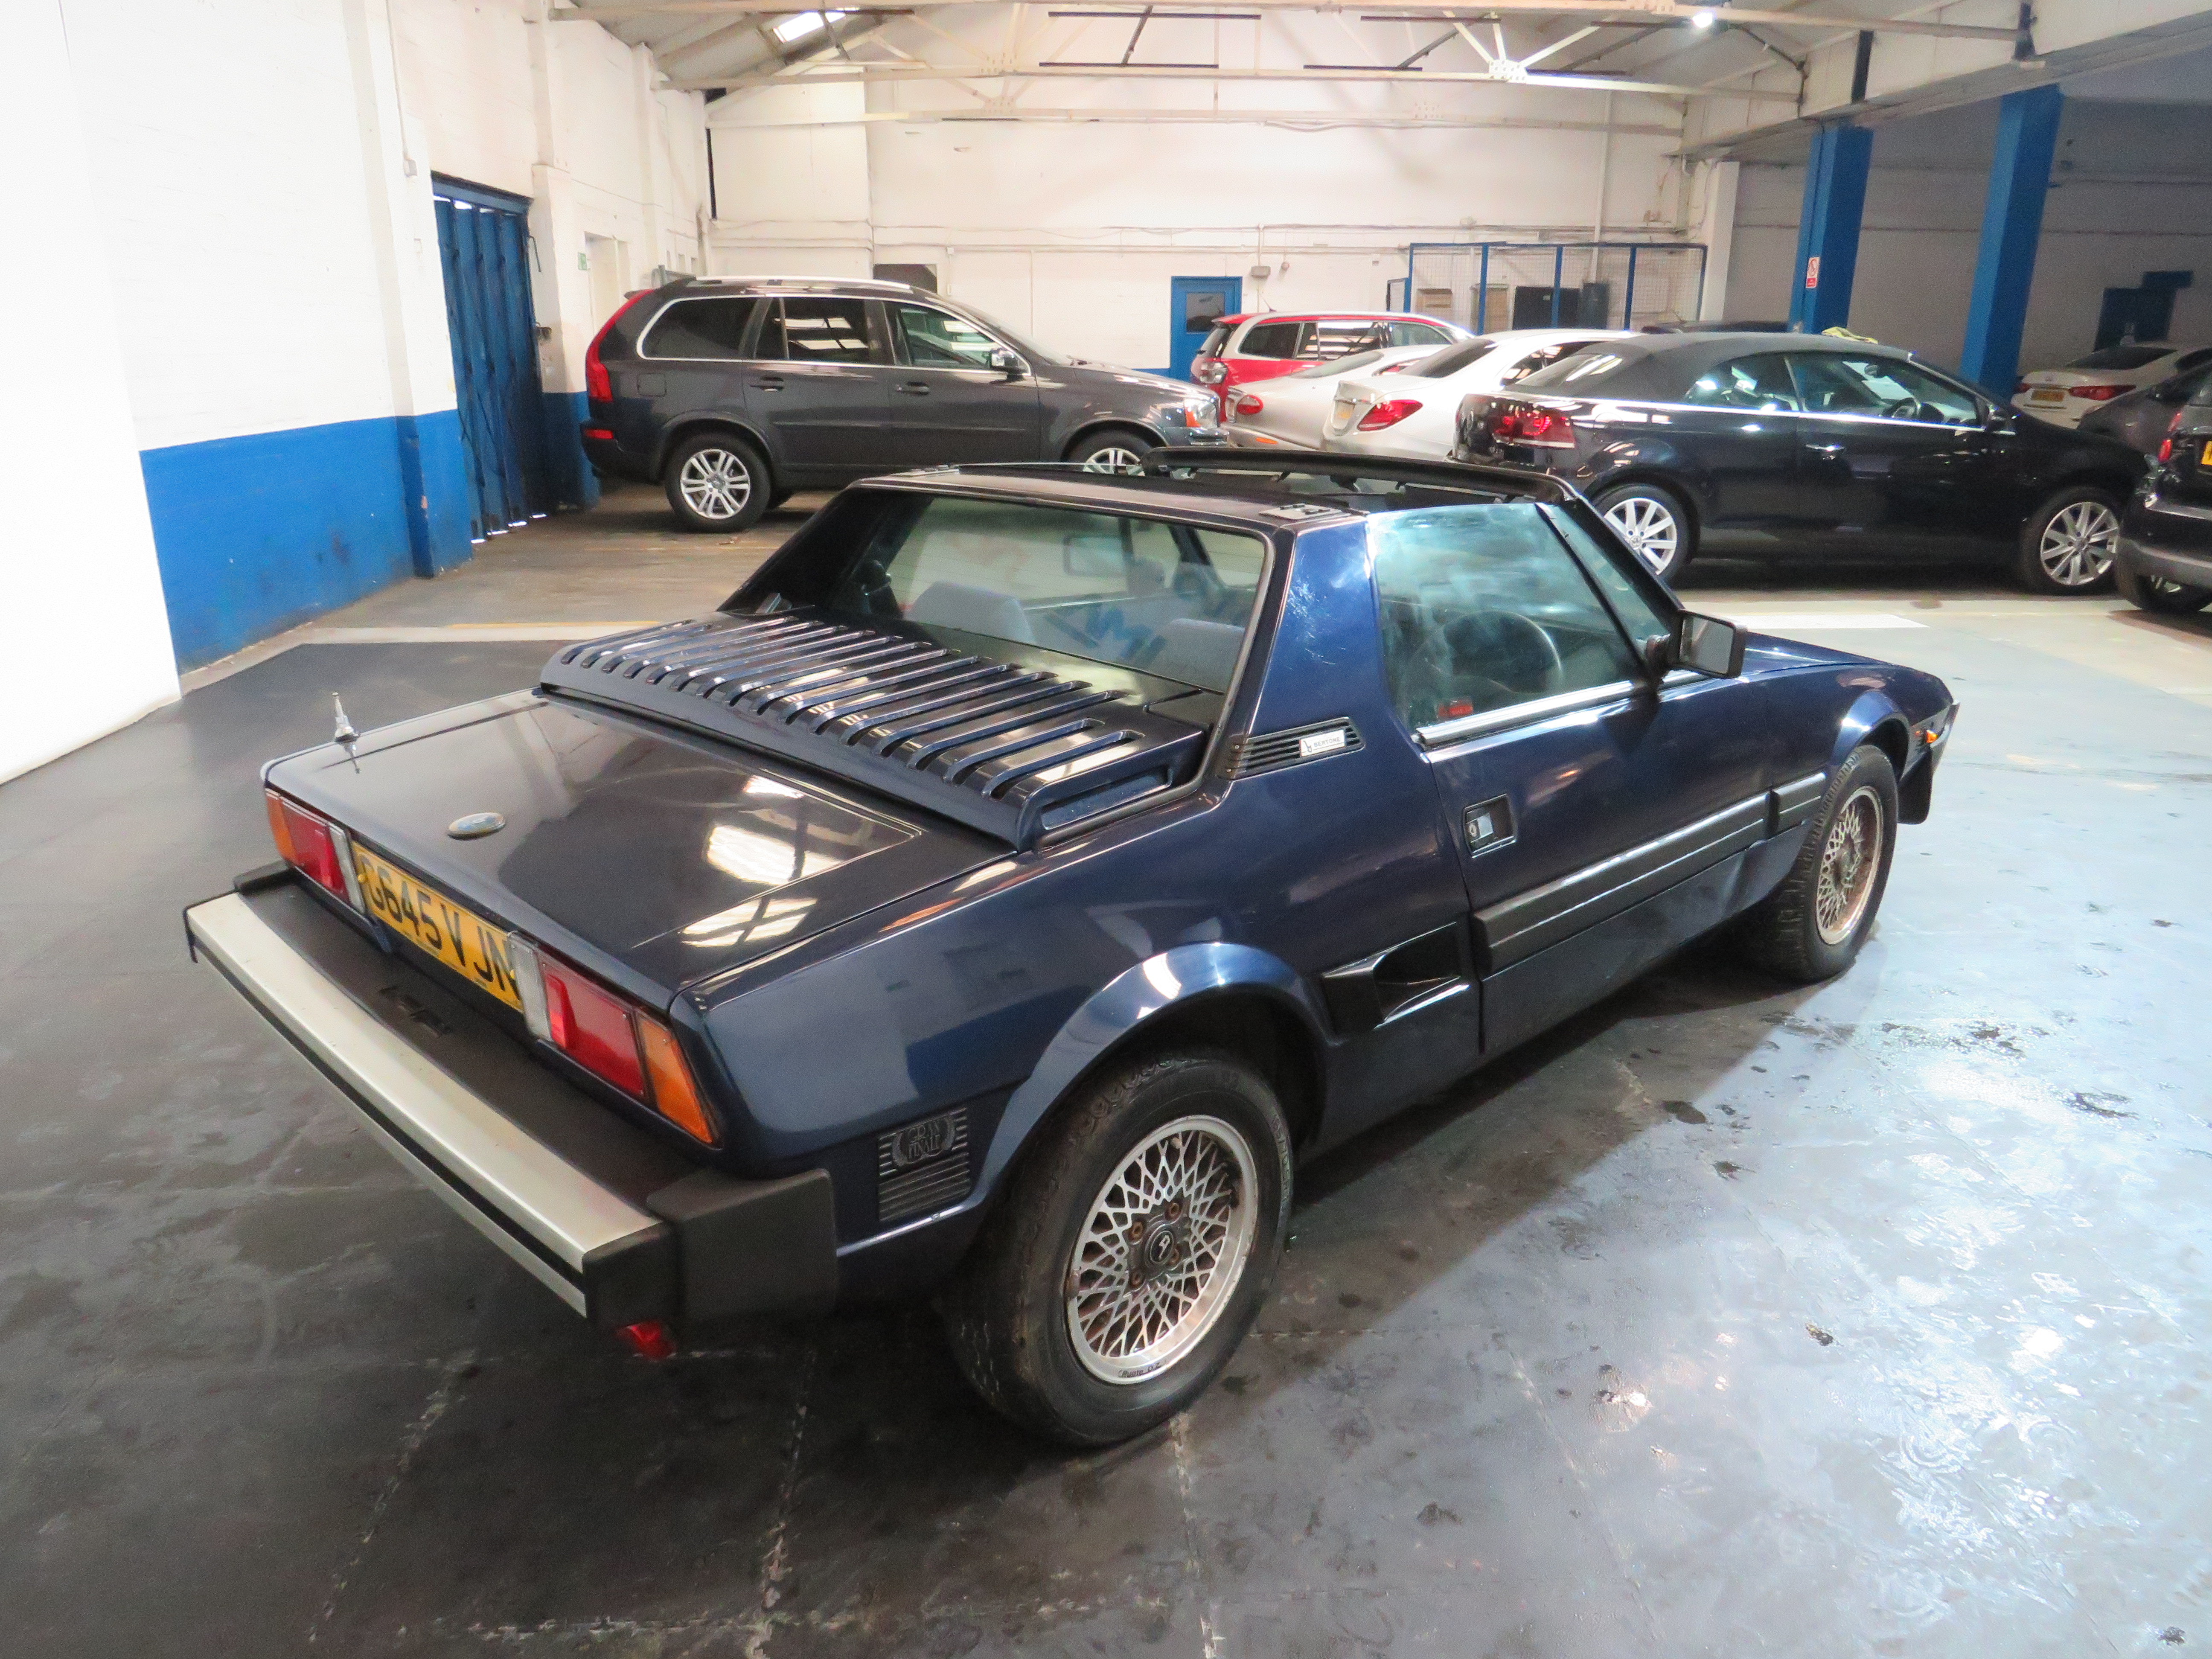 1989 Fiat X1/9 Gran Finale - 1498cc - ONE OWNER FROM NEW - Image 11 of 38